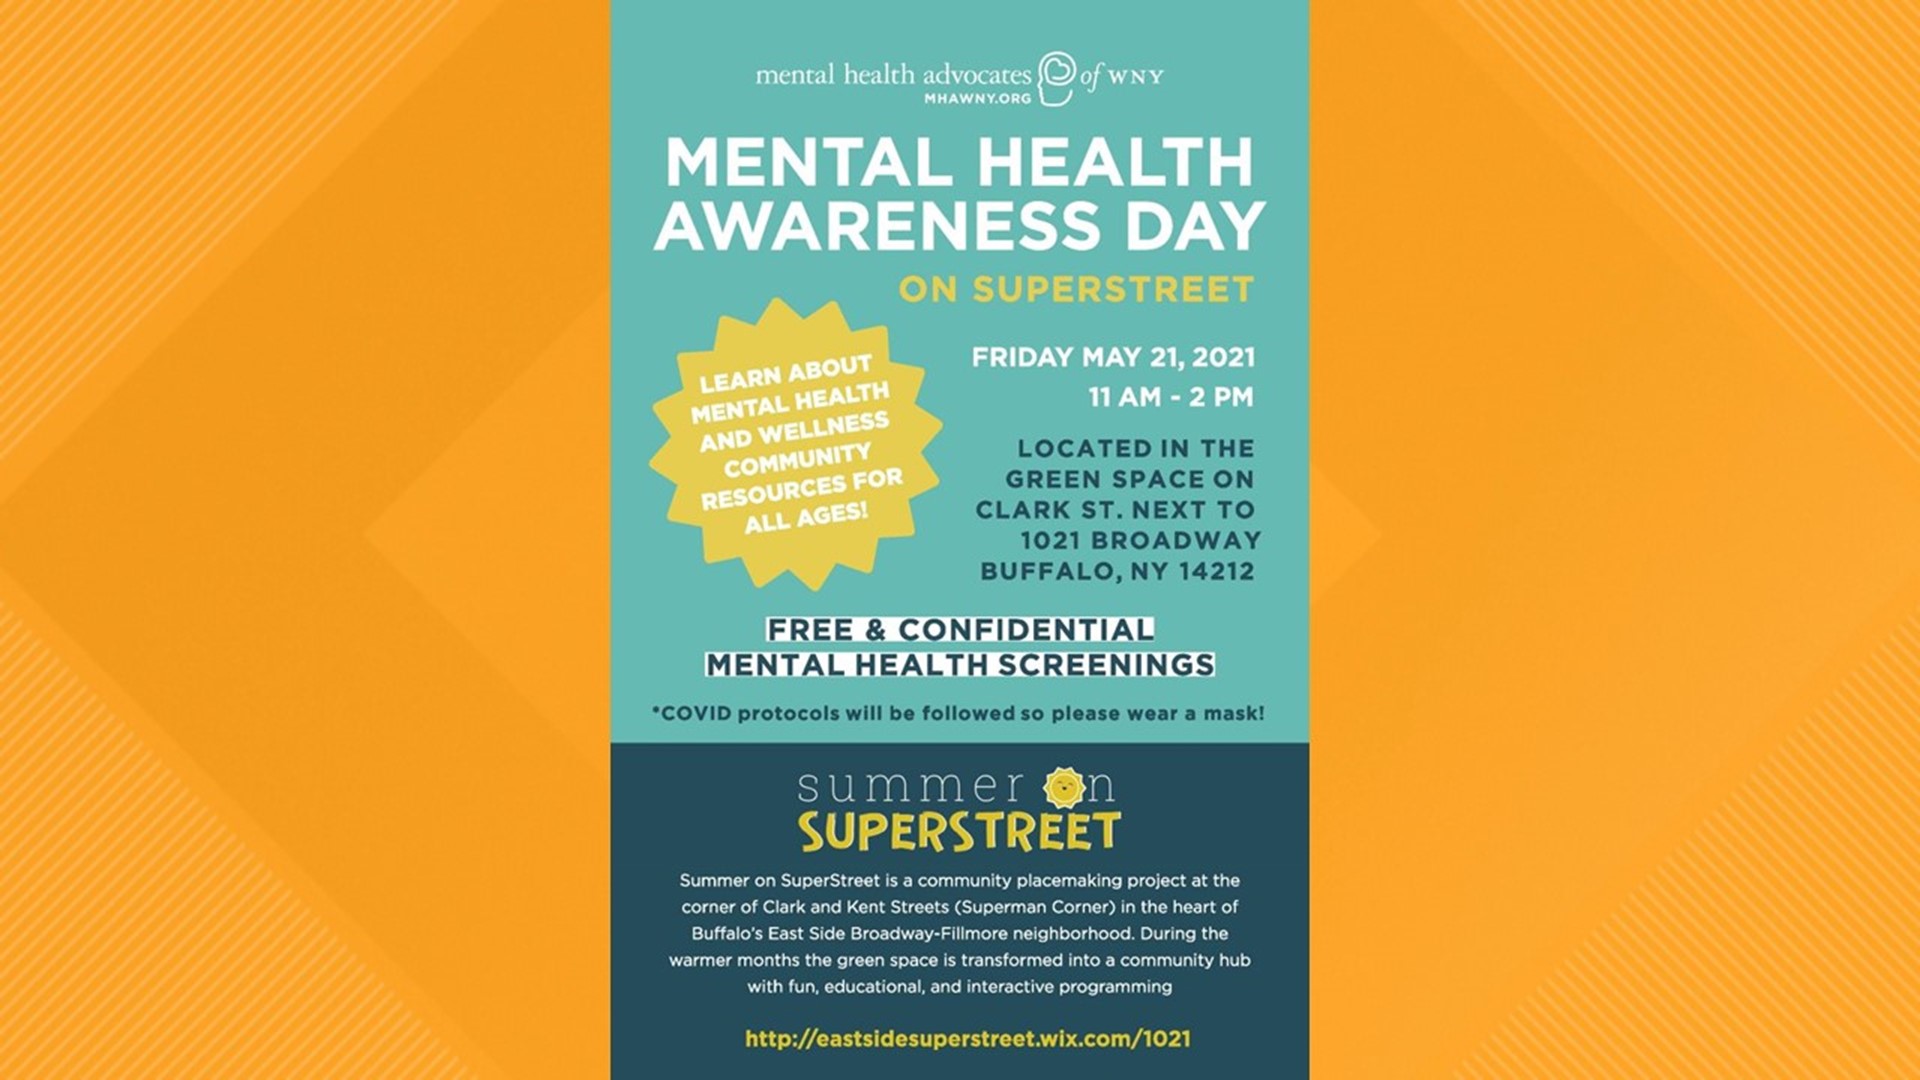 Community residents are invited to come out and learn more about local mental health programs and resources.